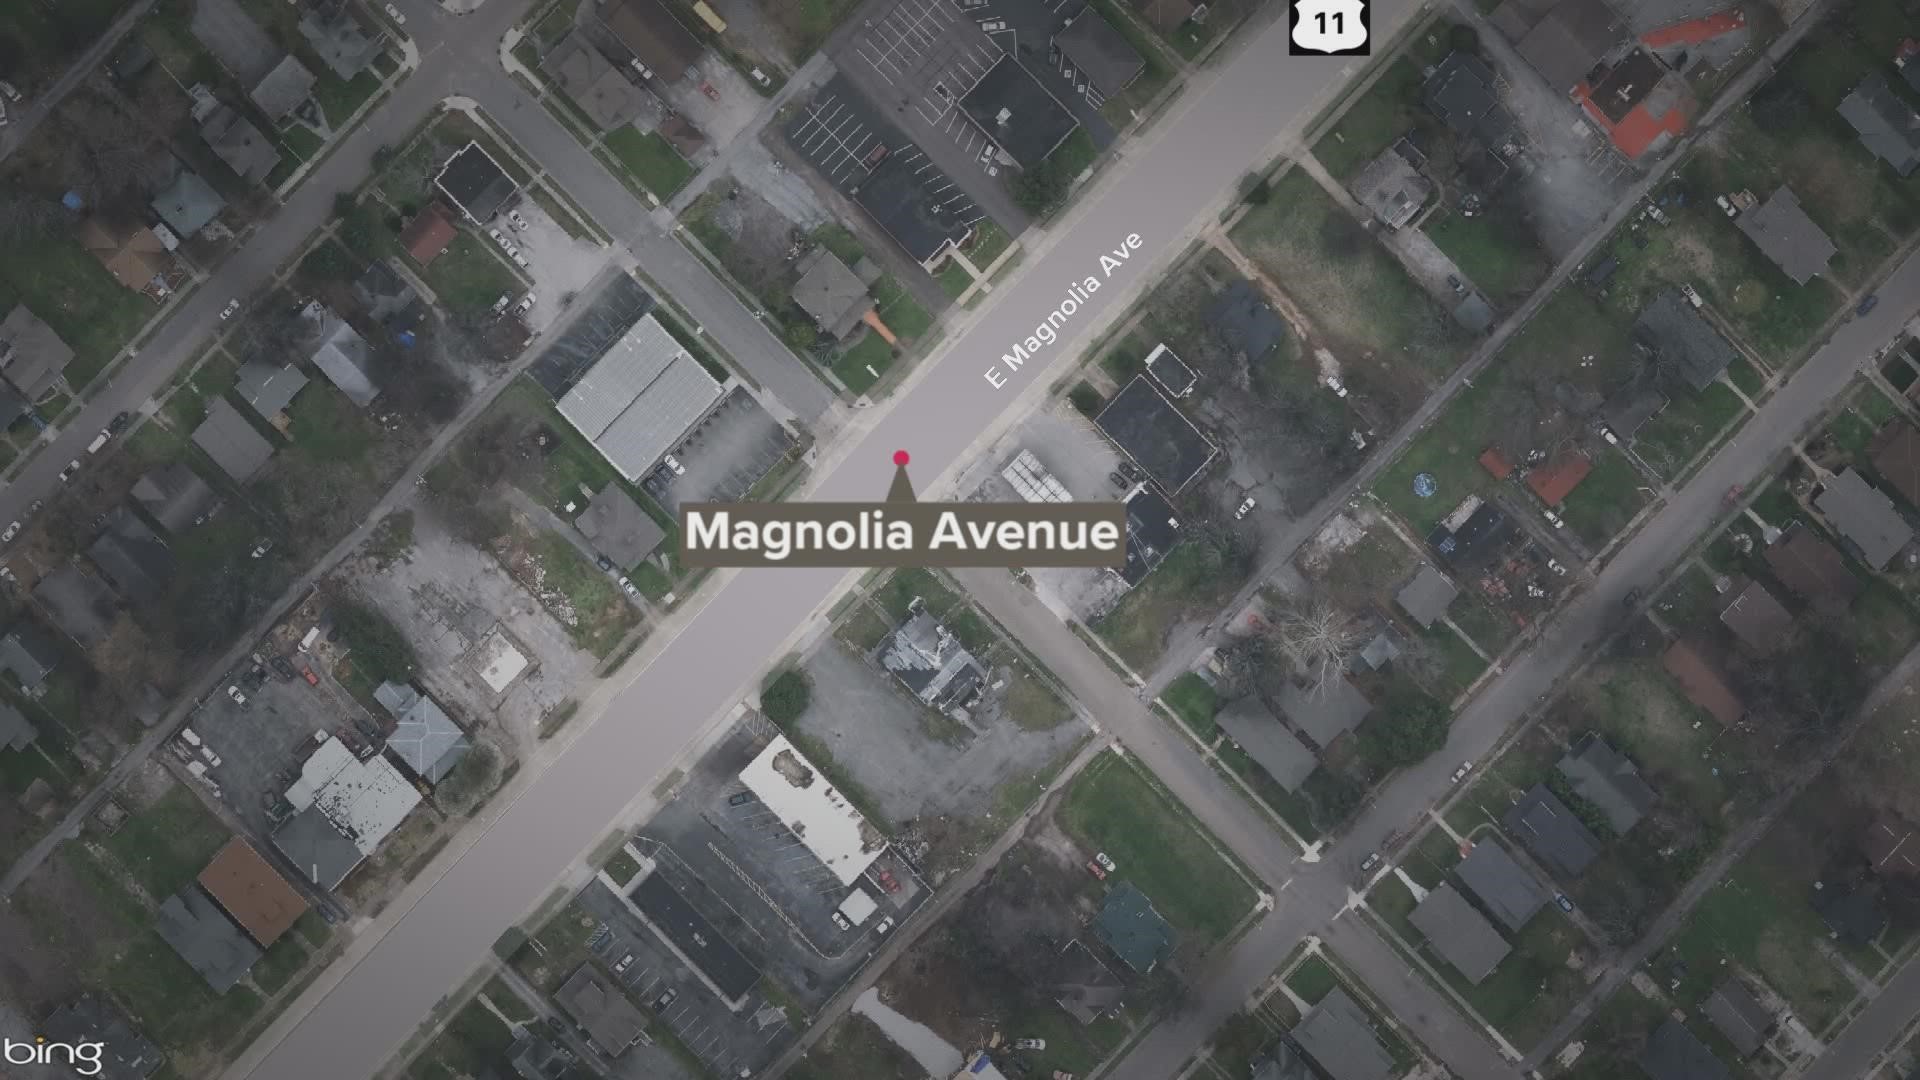 Knoxville police said it happened around 11:15 p.m. on Magnolia Avenue near Spruce Street. When officers got there they found a male bicyclist laying in the street.